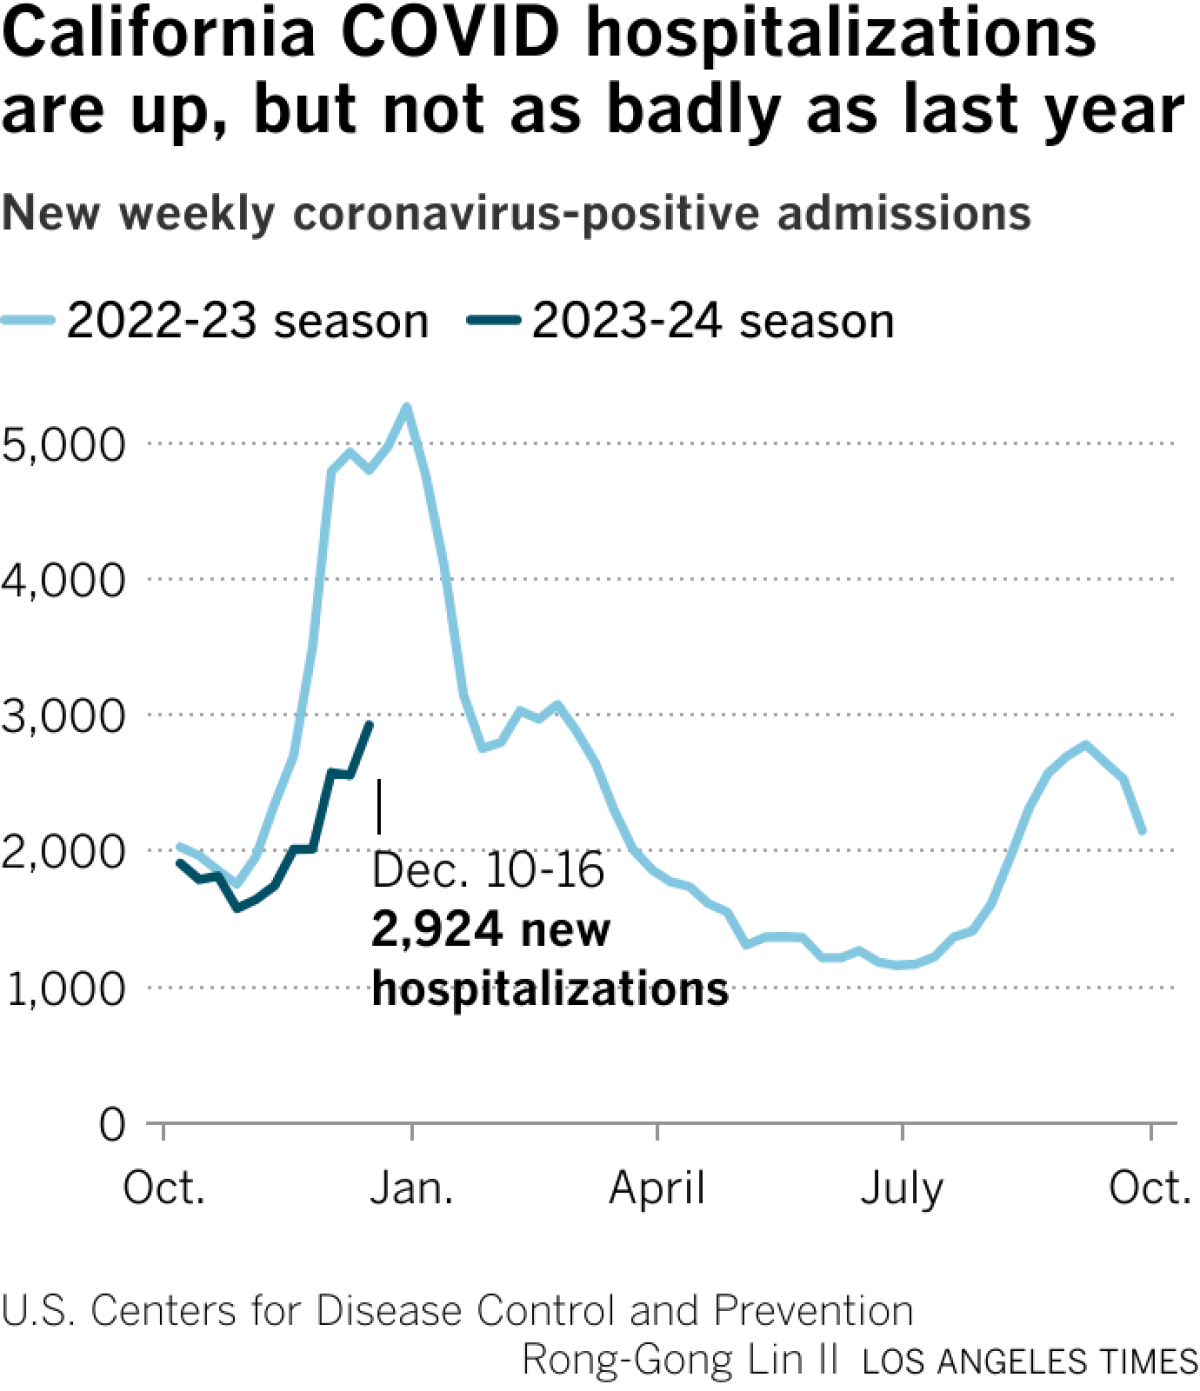 Line chart compares COVID hospitalization rates of the 2023-24 season with the previous. For the week ending on Dec. 9, there were 2,449 new hospitalizations.